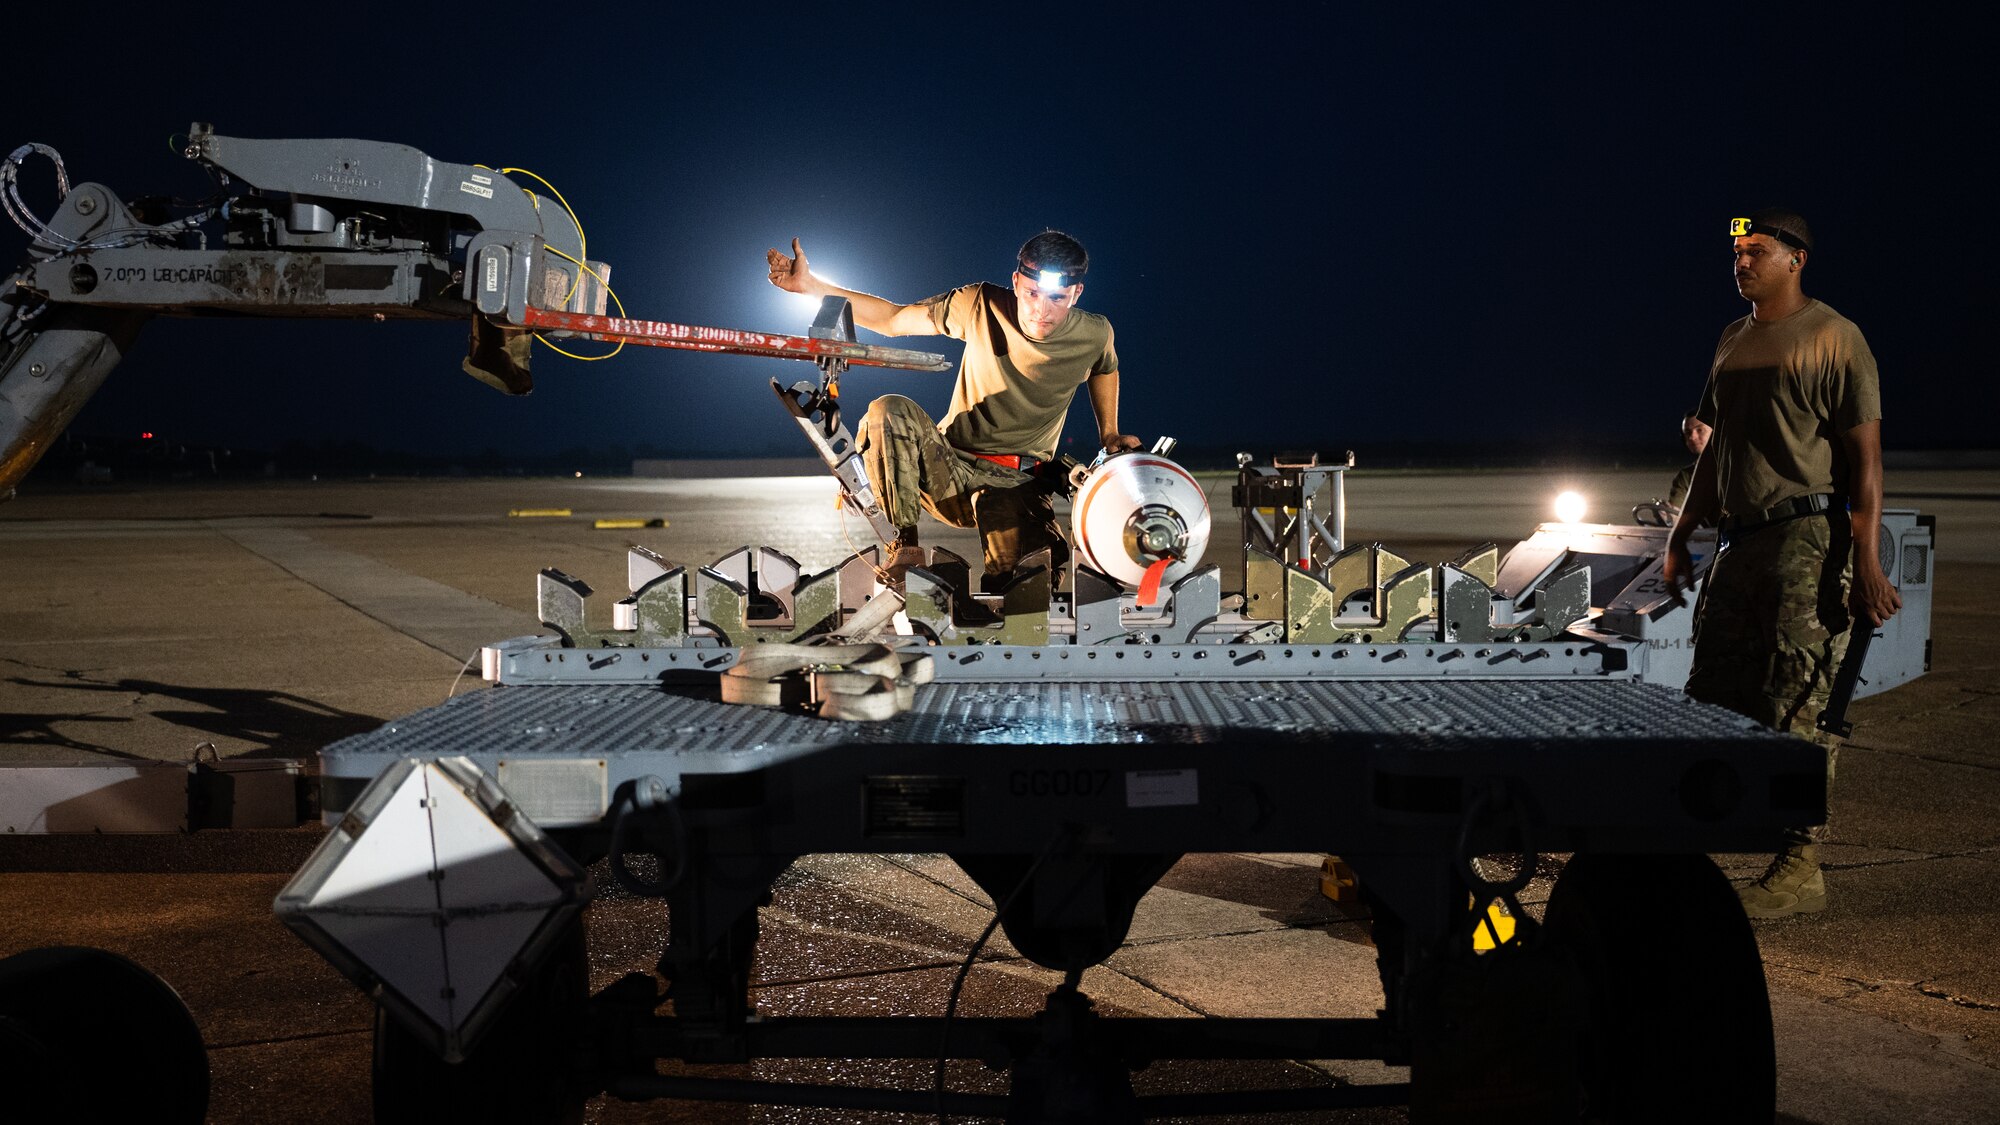 A weapons load crew team from the 2nd Aircraft Maintenance Squadron transfer an Mk-62 Quickstrike naval mine in support of a training exercise at Barksdale Air Force Base, Louisiana, Aug. 25, 2021. The 2nd AMXS weapons load crews have the ability to load naval mines, as well conventional and nuclear weapons. (U.S. Air Force photo by Senior Airman Jacob B. Wrightsman)